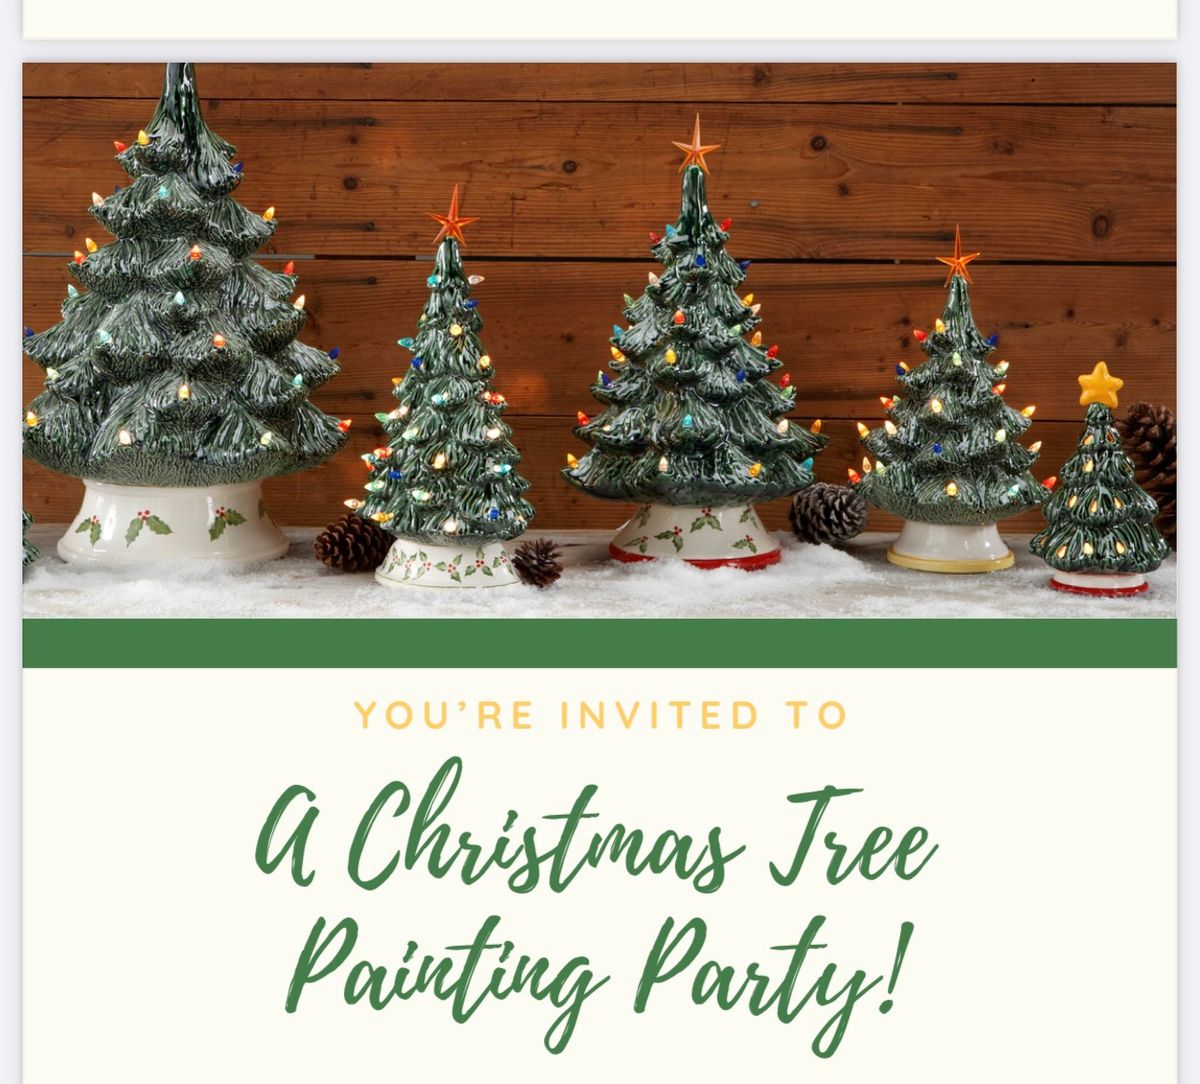 Christmas Tree Paint Party